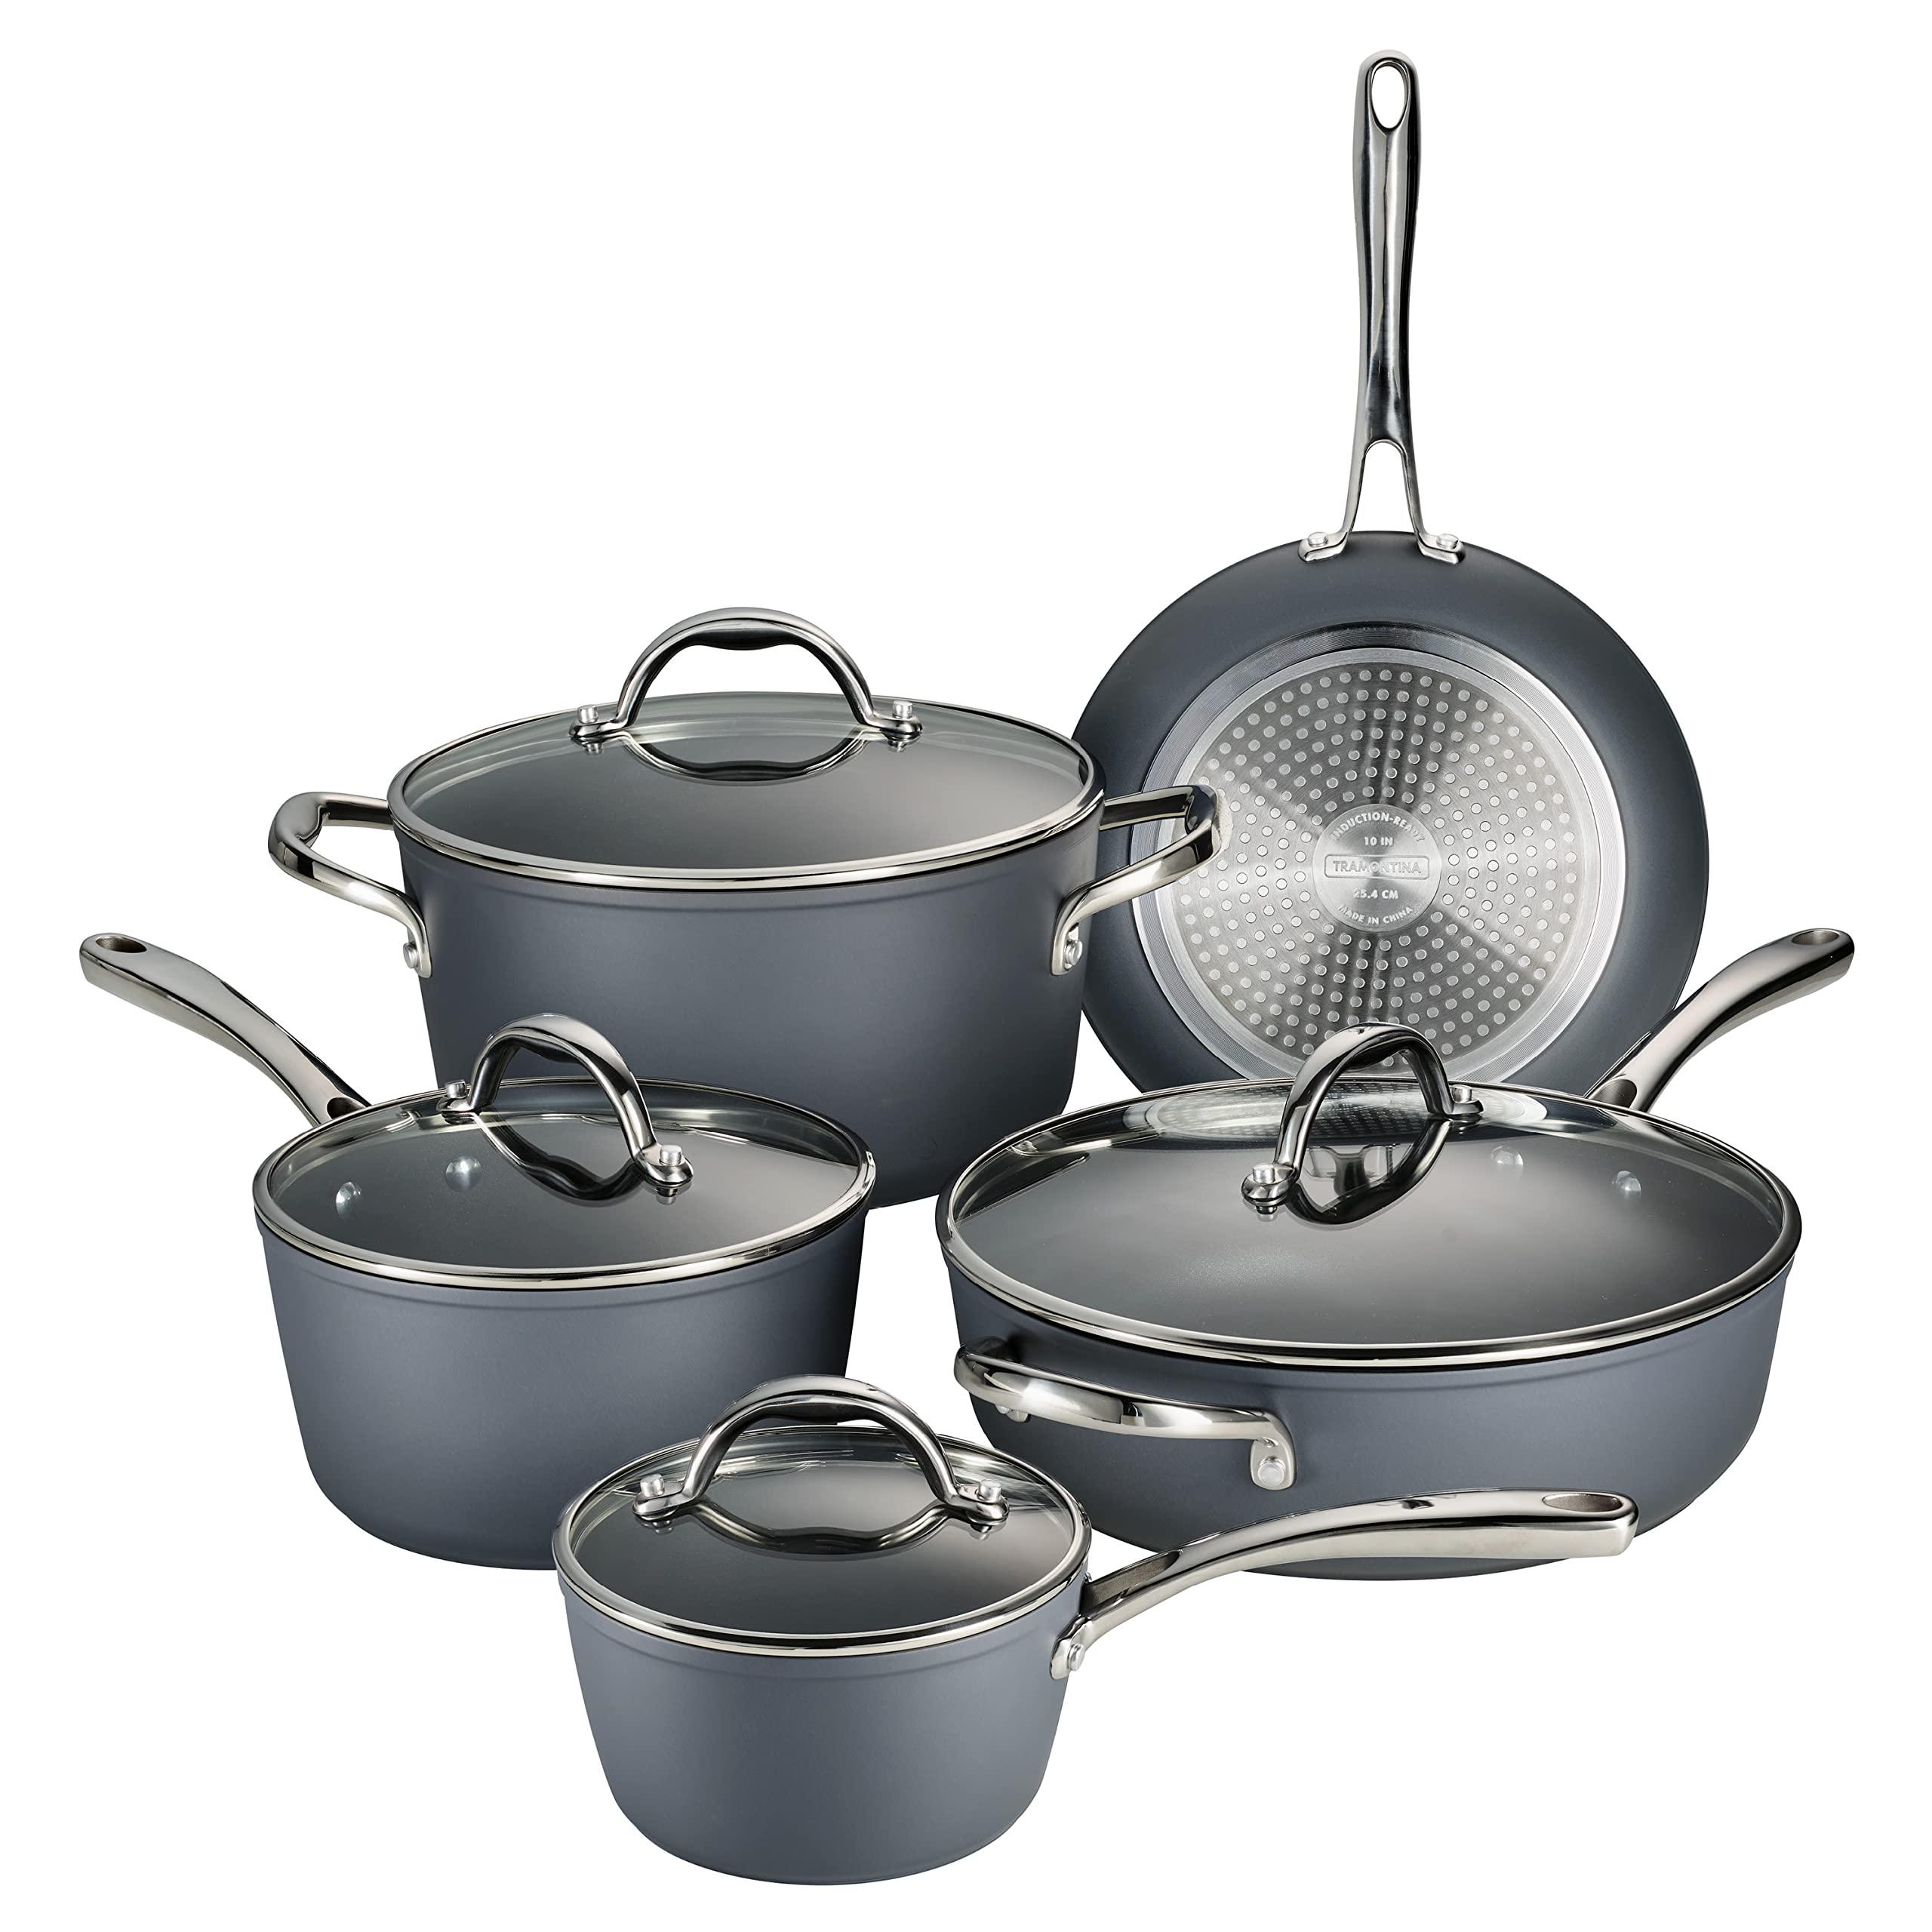 Tramontina tramontina 9 pc induction nonstick cookware set, 80110/029ds